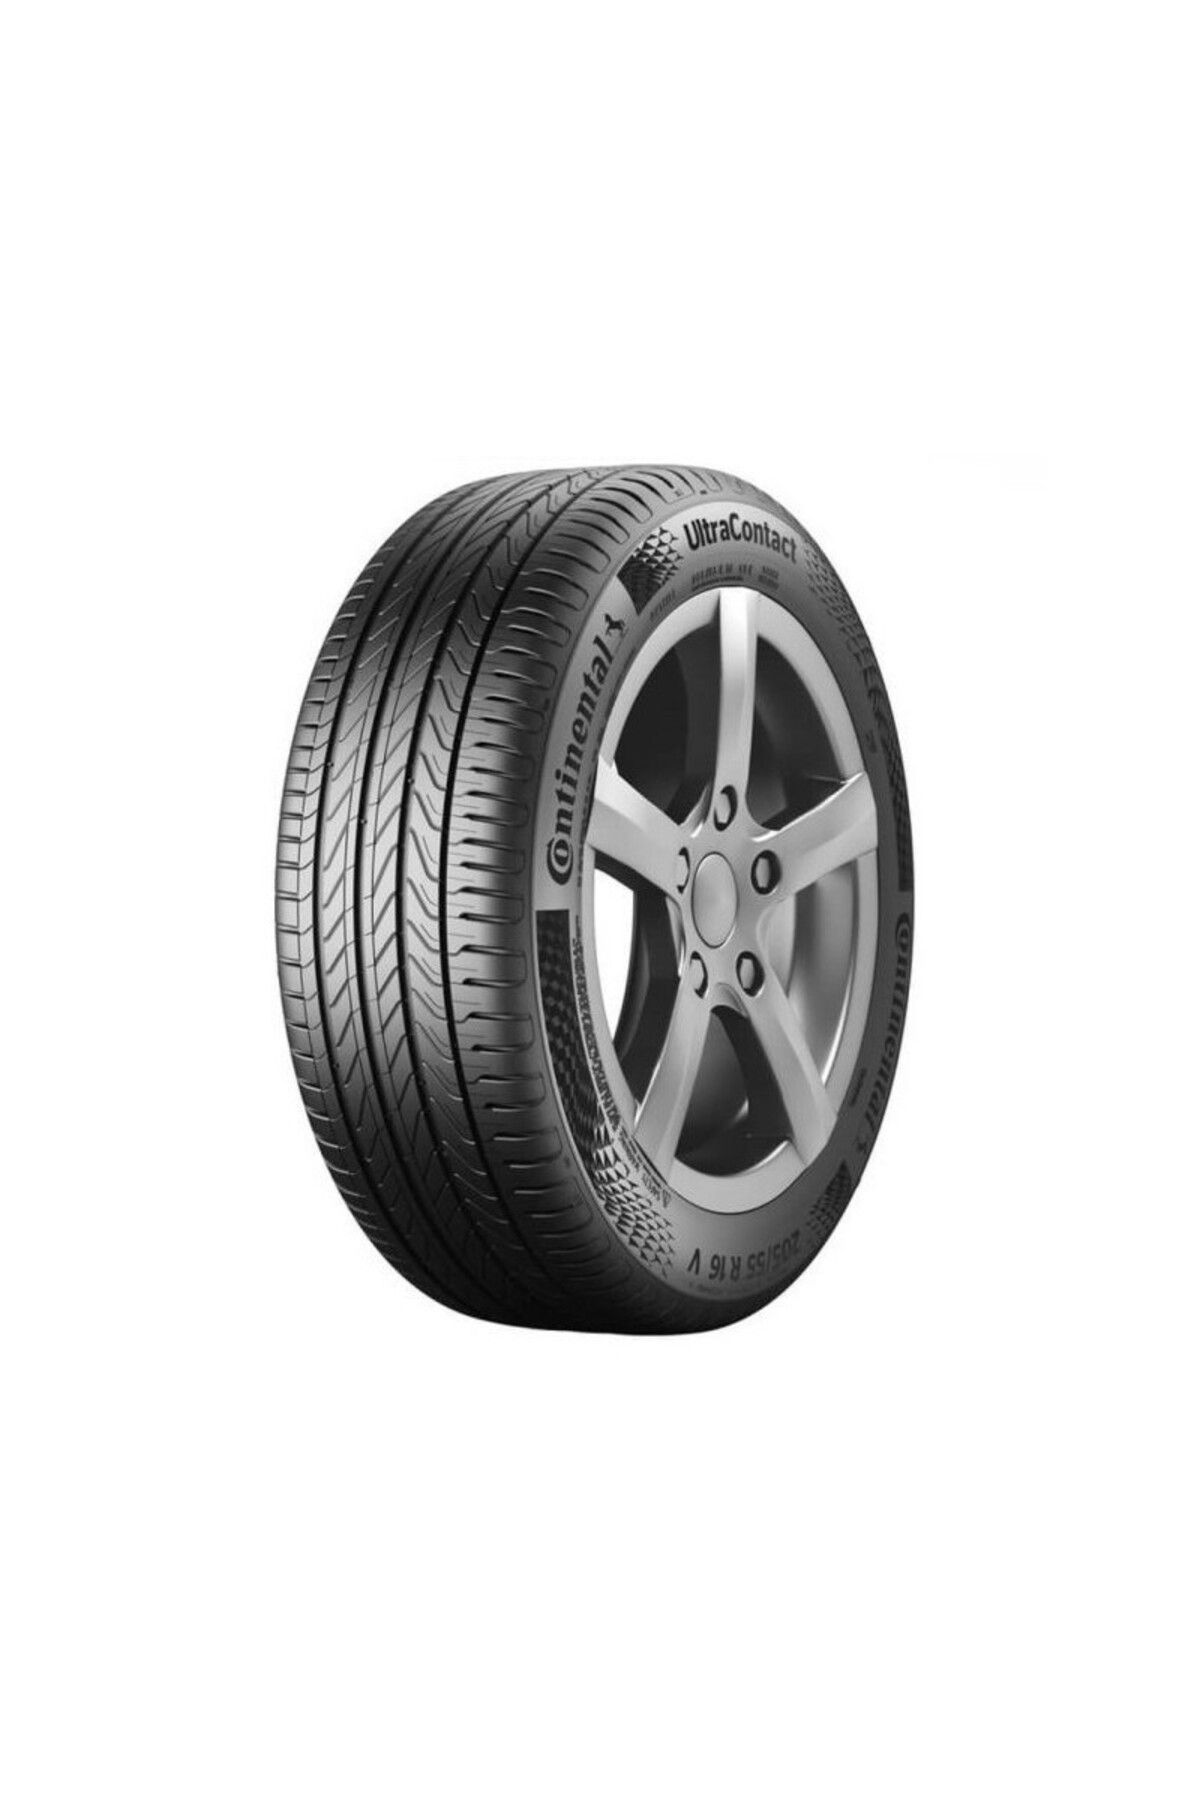 Continental 185/65R15 88T Ultracontact